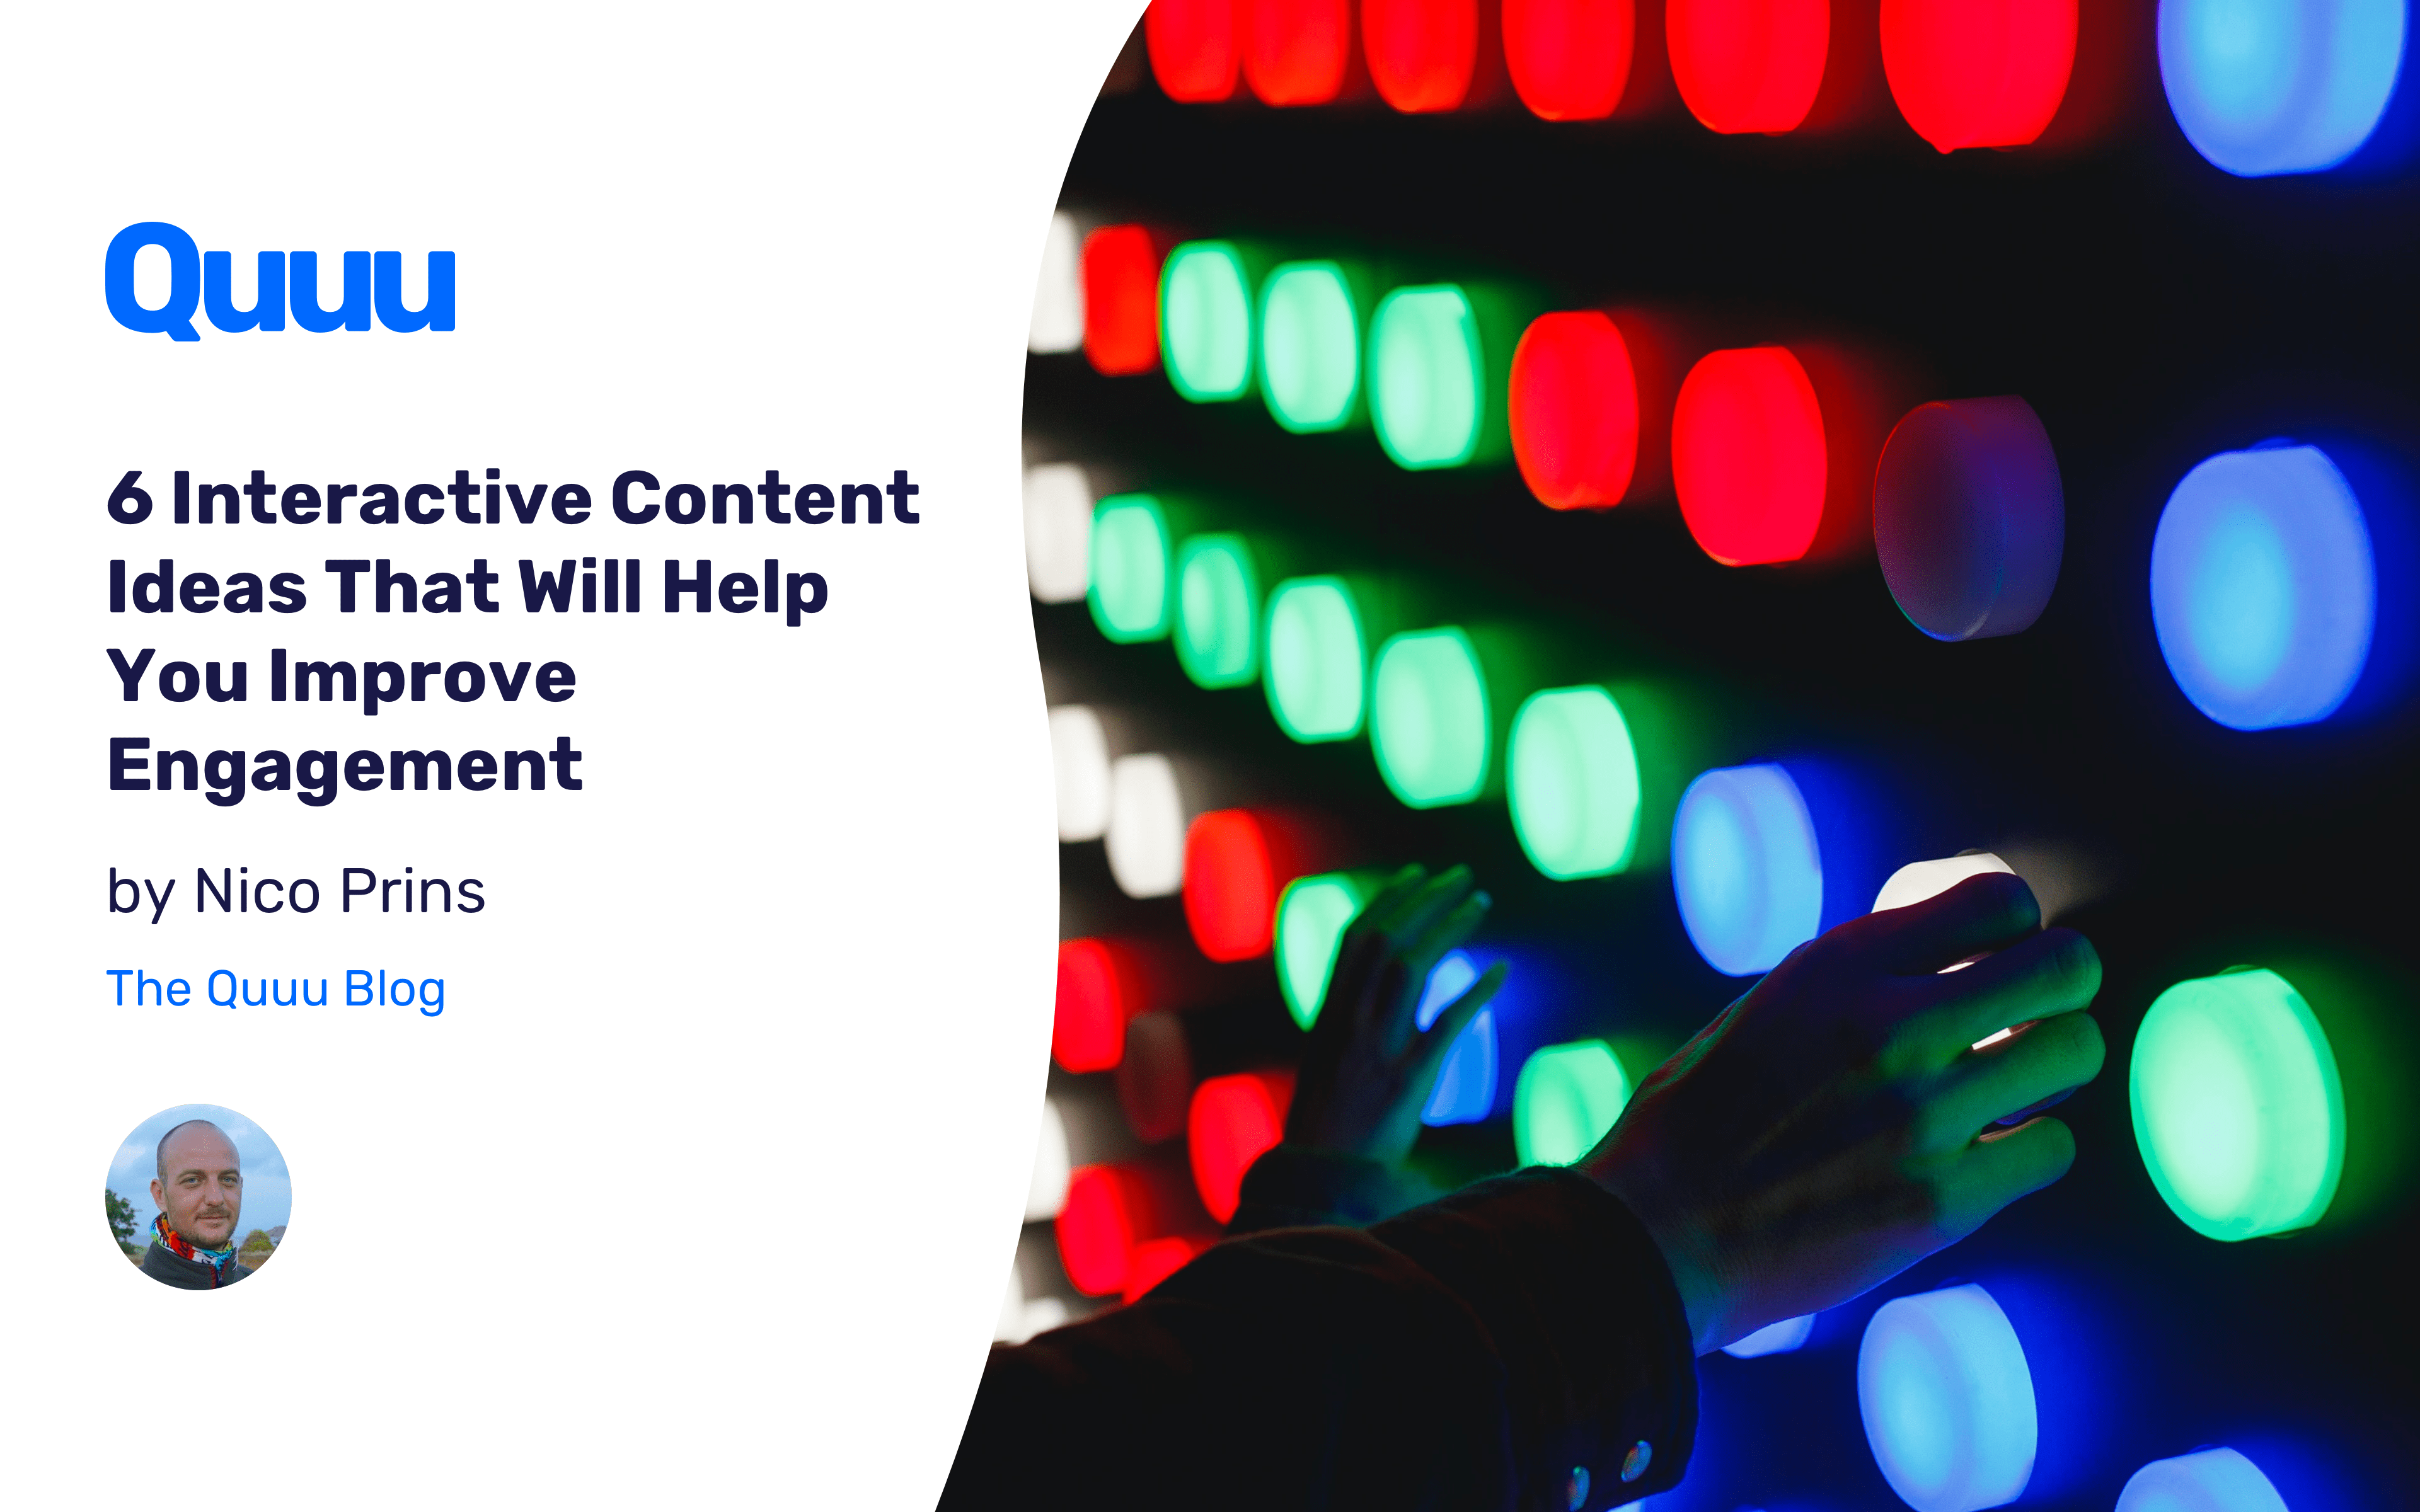 6 Interactive Content Ideas That Will Help You Improve Engagement